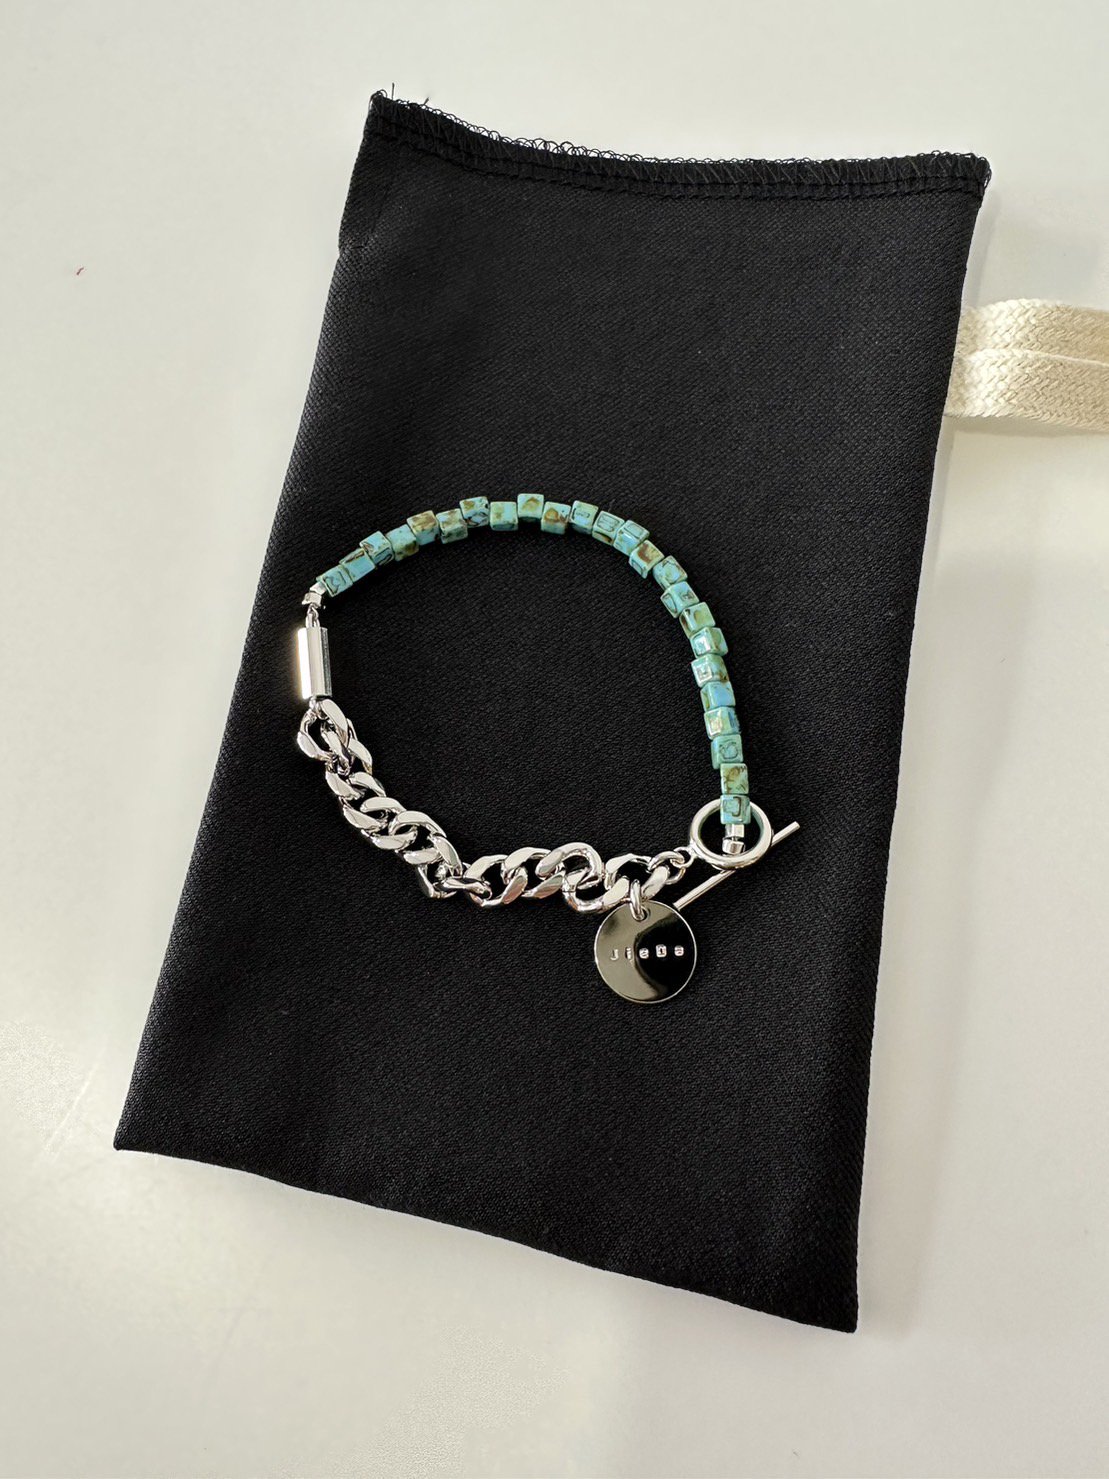 JieDa<br />SWITCHING BEADS BRACELET / TURQUOISE <img class='new_mark_img2' src='https://img.shop-pro.jp/img/new/icons47.gif' style='border:none;display:inline;margin:0px;padding:0px;width:auto;' />